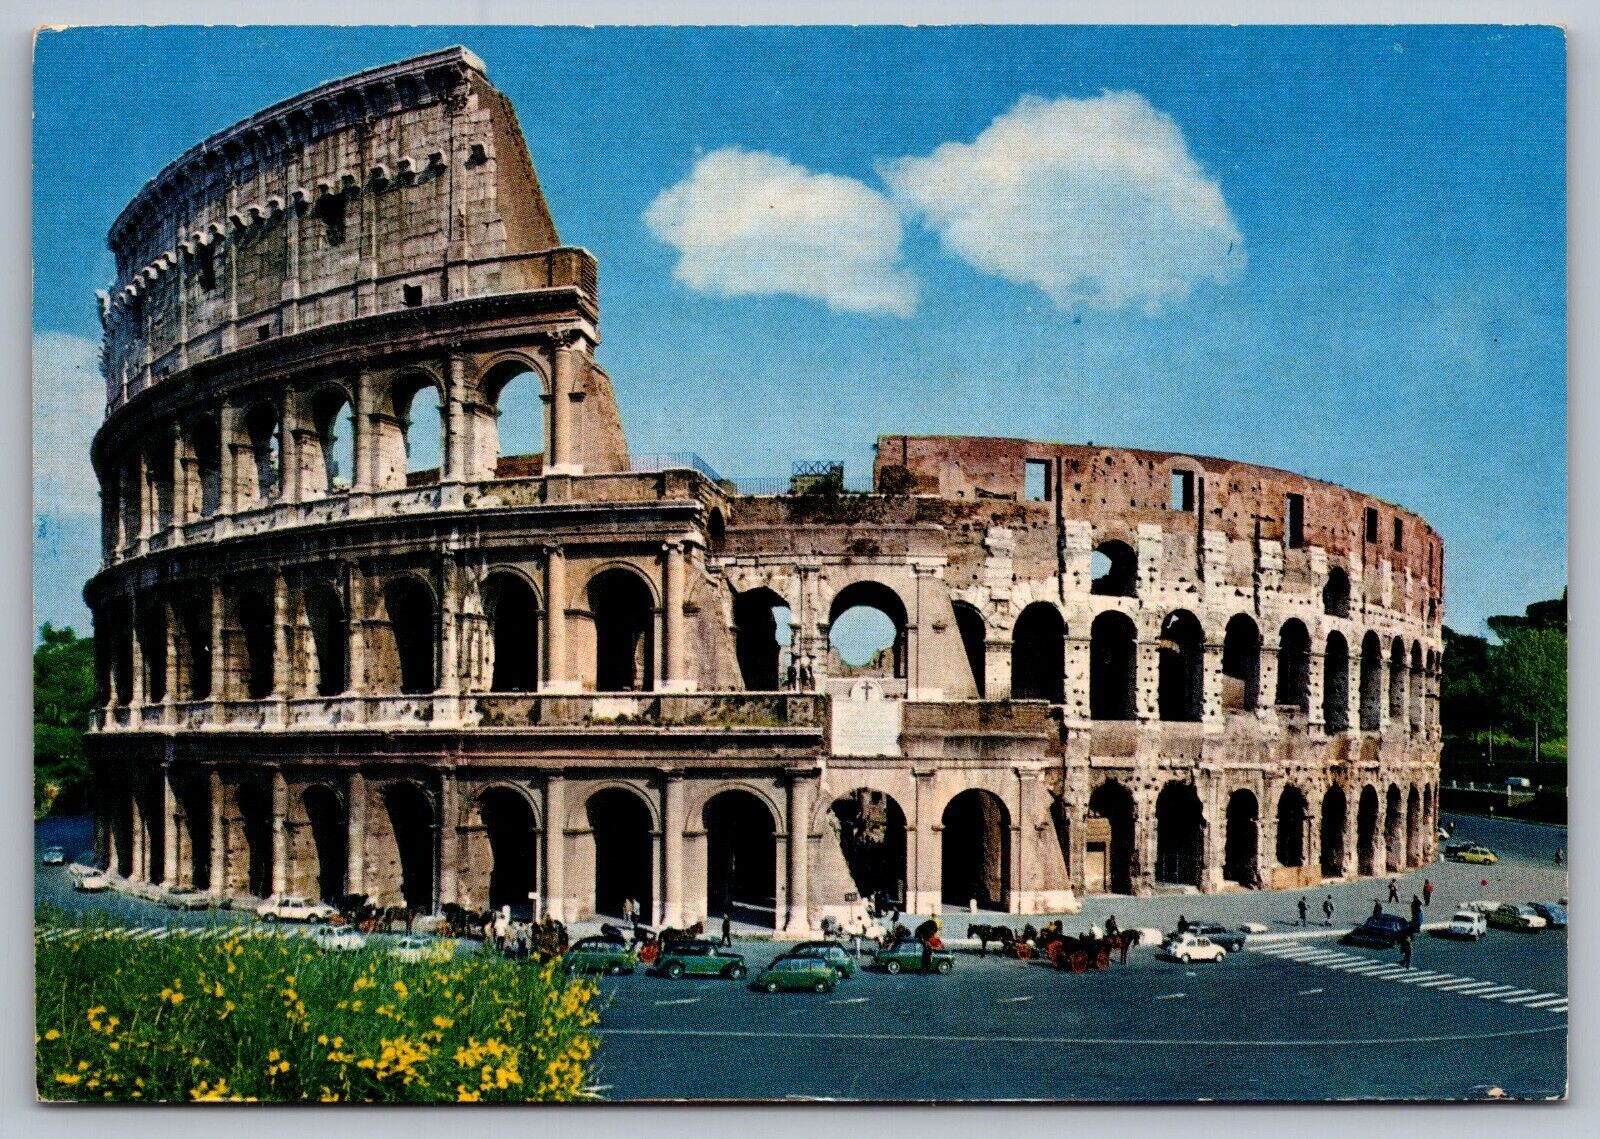 The Colosseum Rome Italy VTG Postcard 1980s-Italian Cars-Horses/Carriages-Stamps